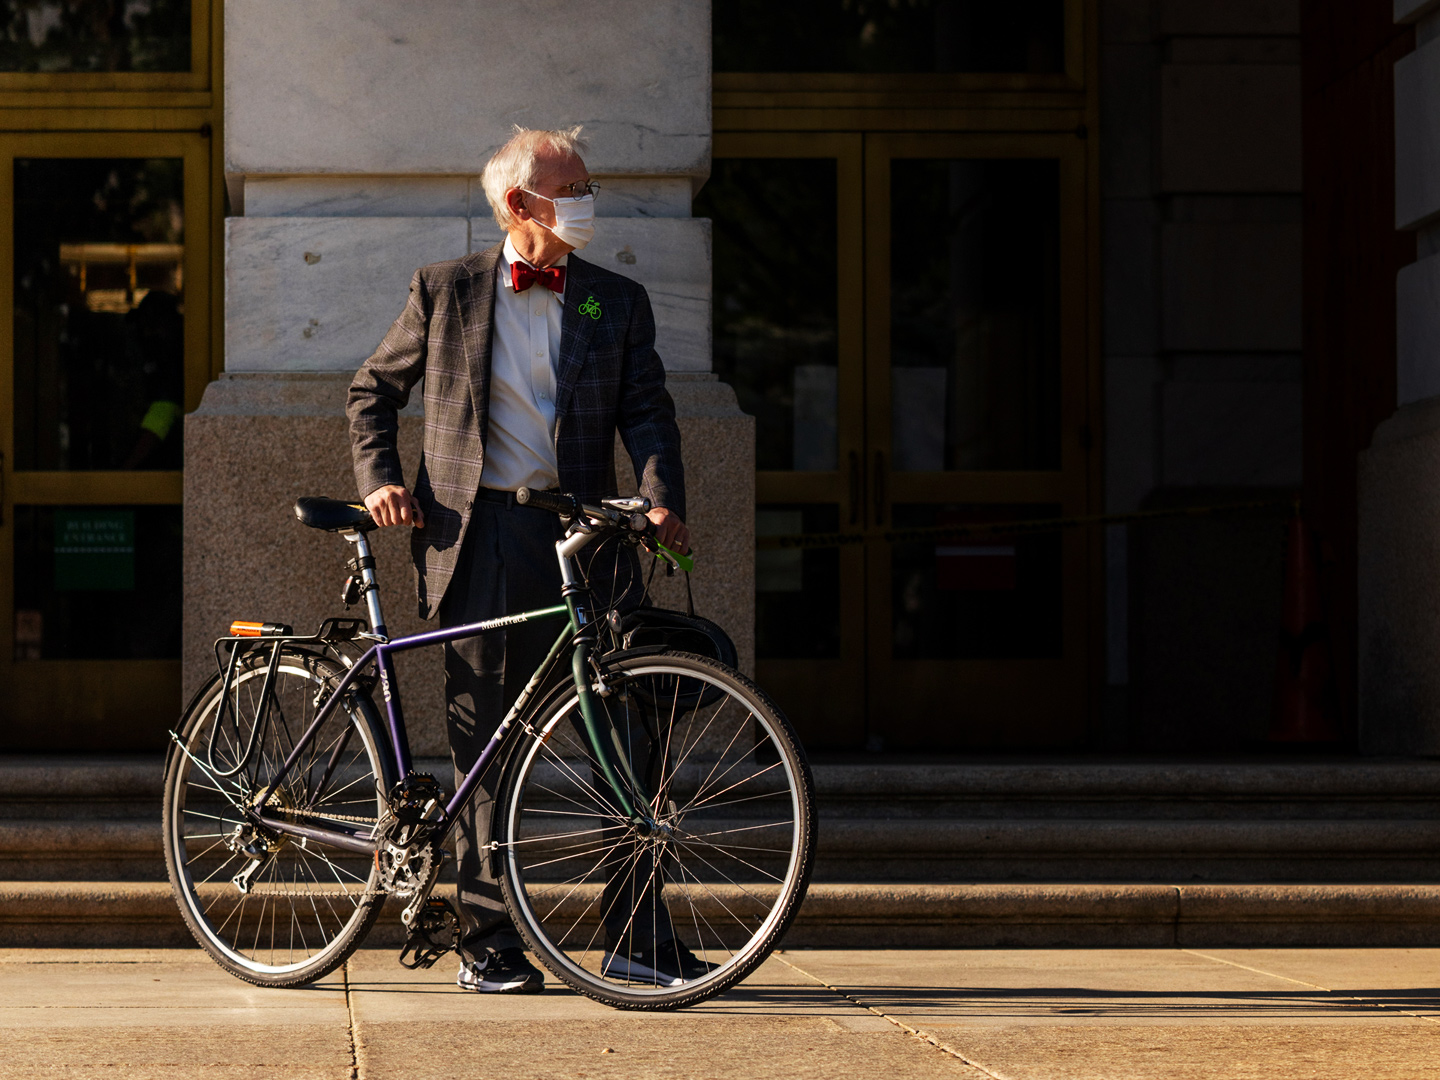 Congressman Earl Blumenauer stands behind his green bicycle. He is wearing a grey suit with a red bowtie and a white surgical mask. He is holding his green bicycle in front of him, and stands on a sidewalk with a grey building behind him.